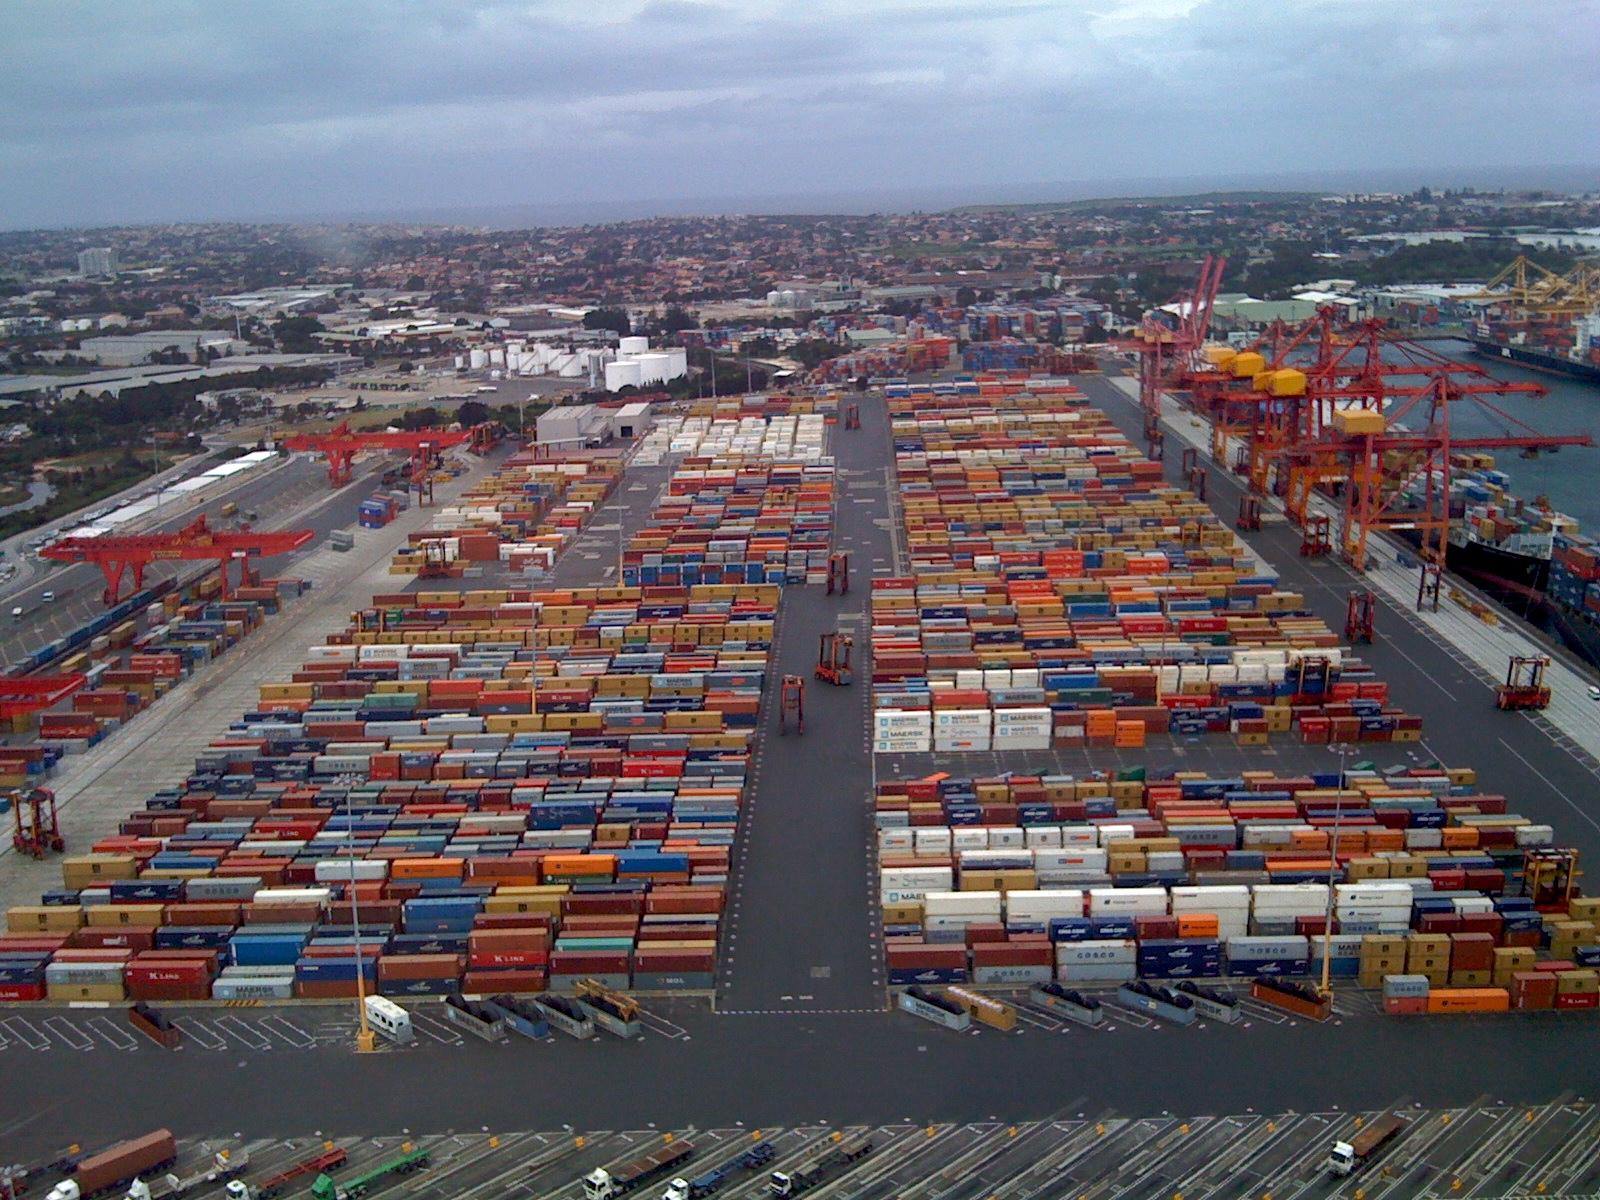 File:Sydney container port by air.jpg - Wikimedia Commons